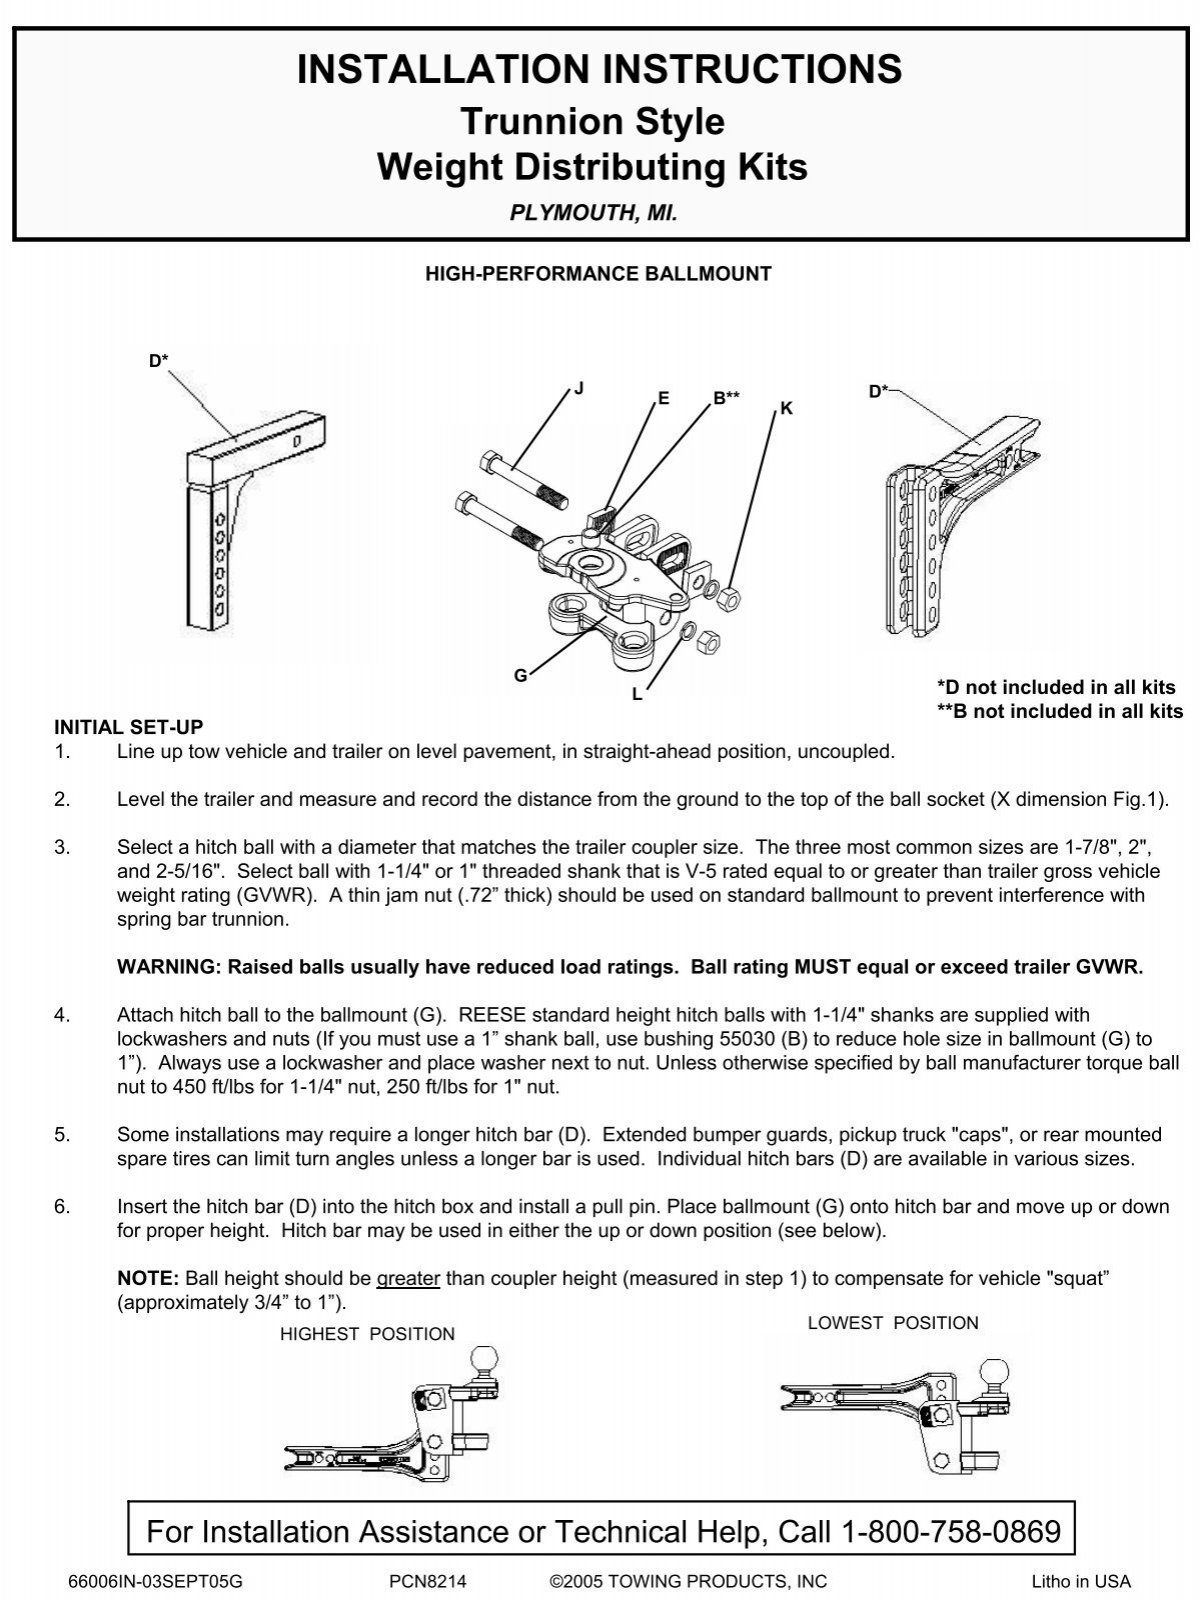 reese-hitch-install-instructions-michigan-truck-spring